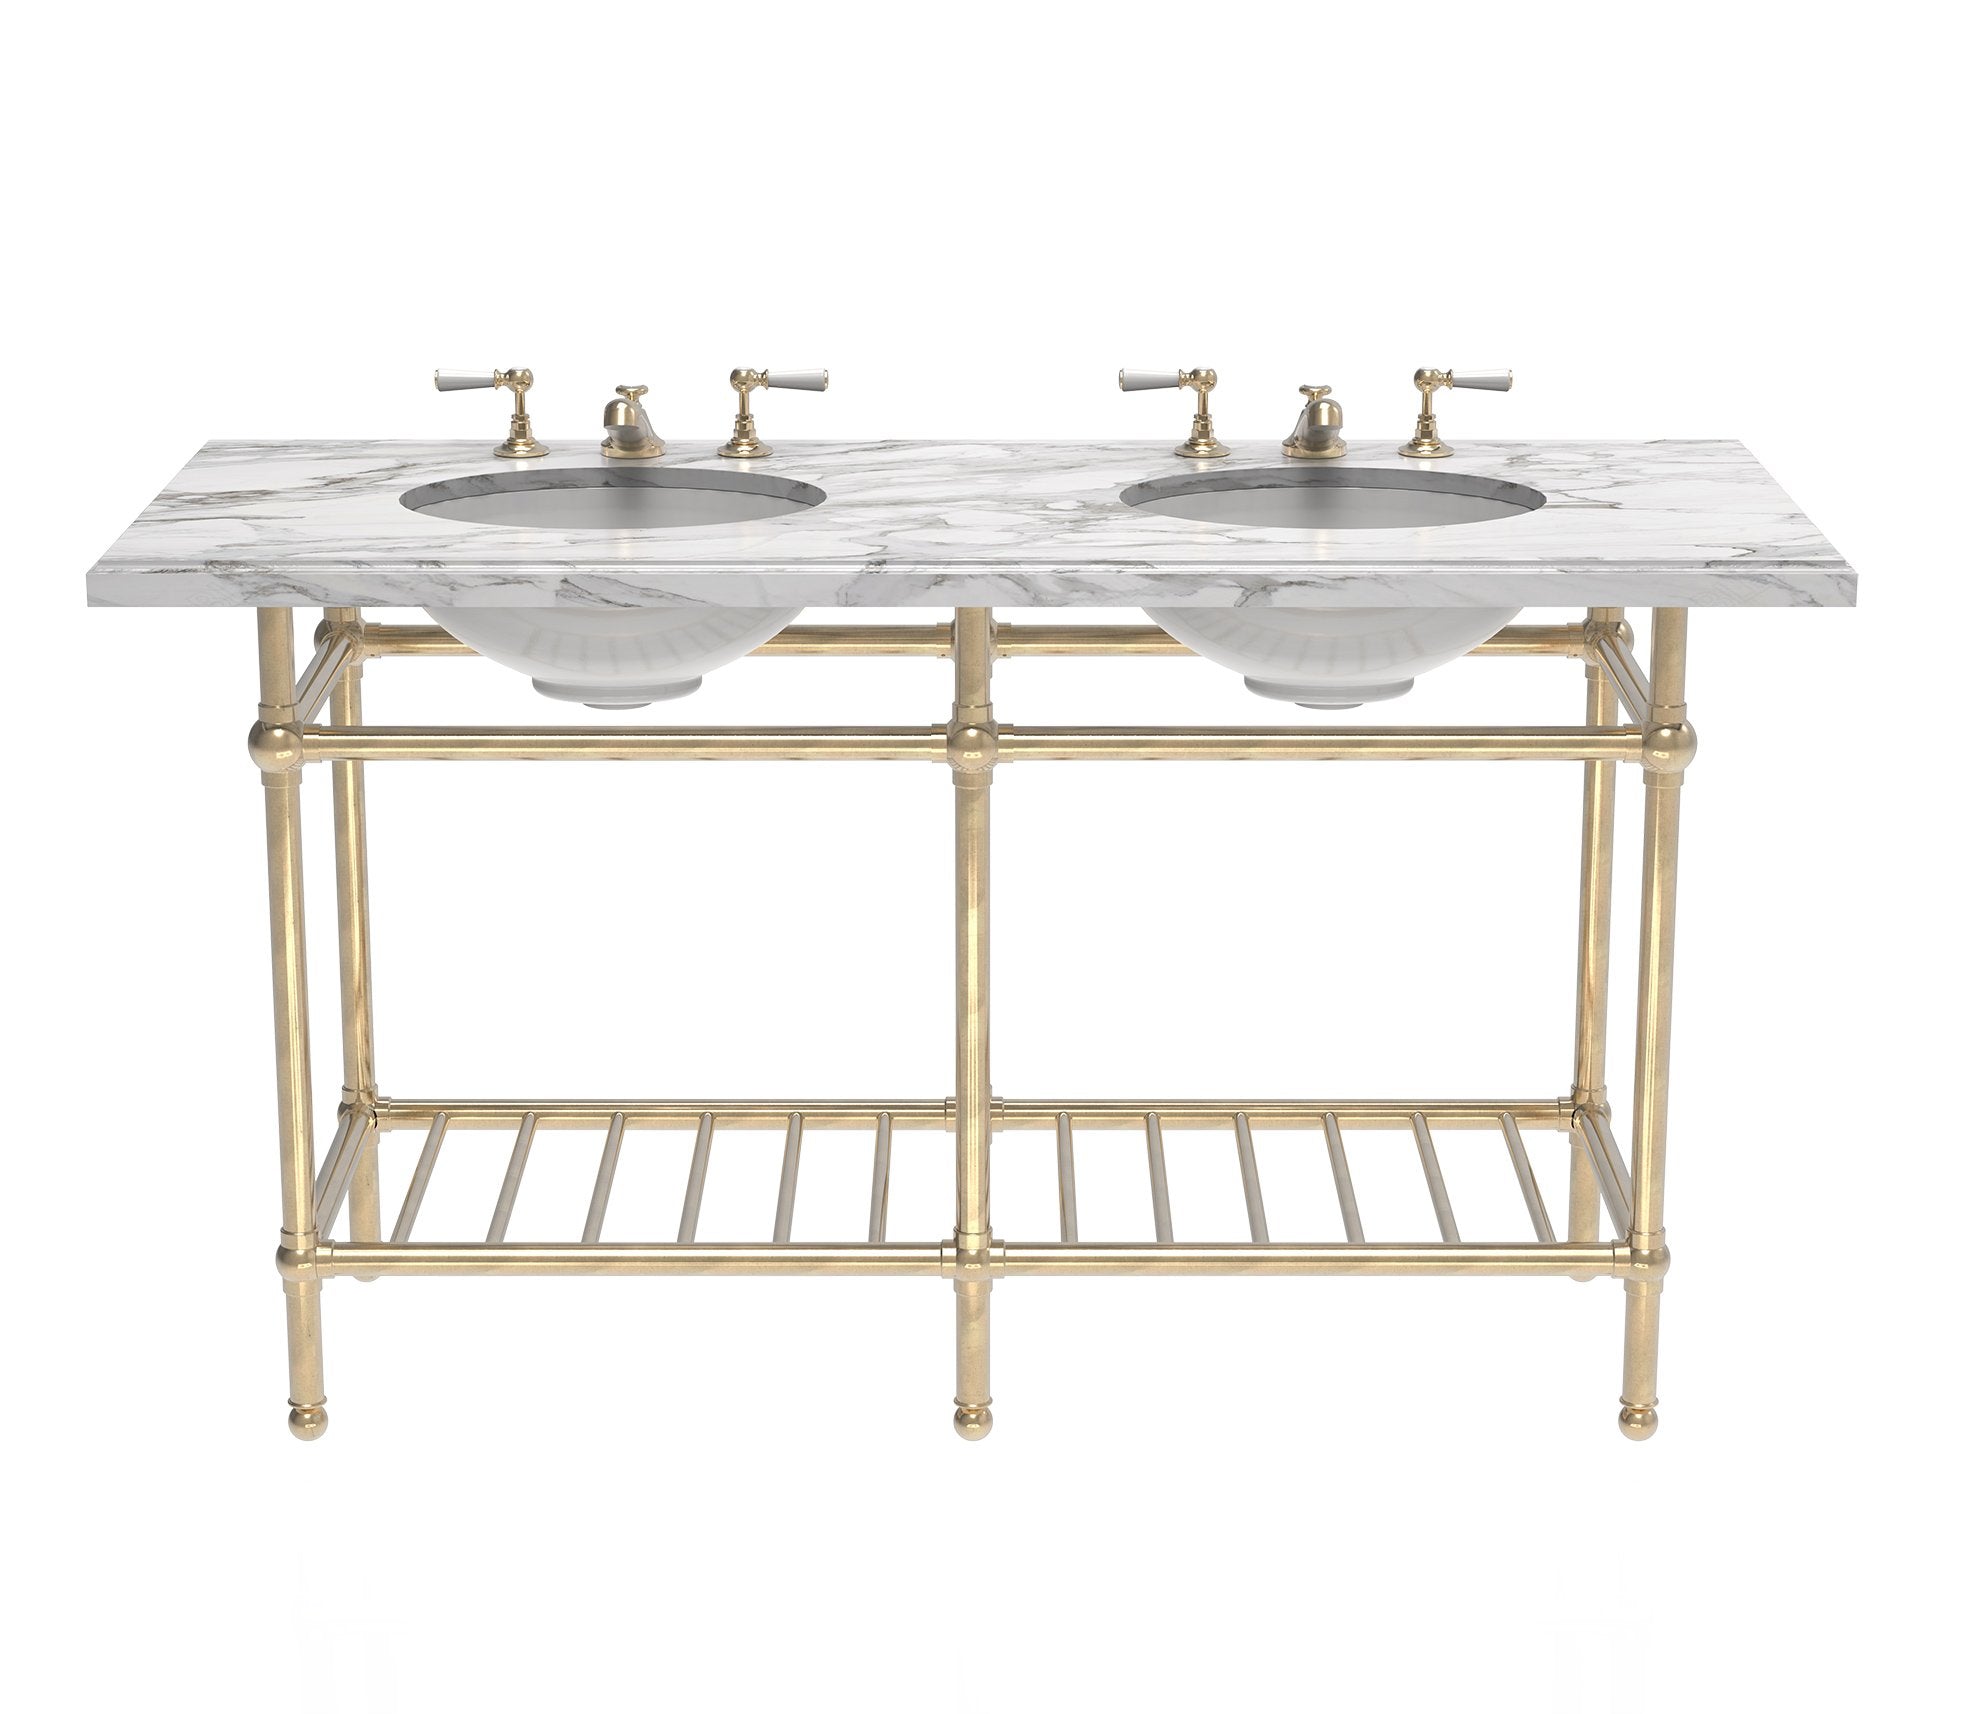 Gotham Washstand with Metal Shelf Double Product Image 3